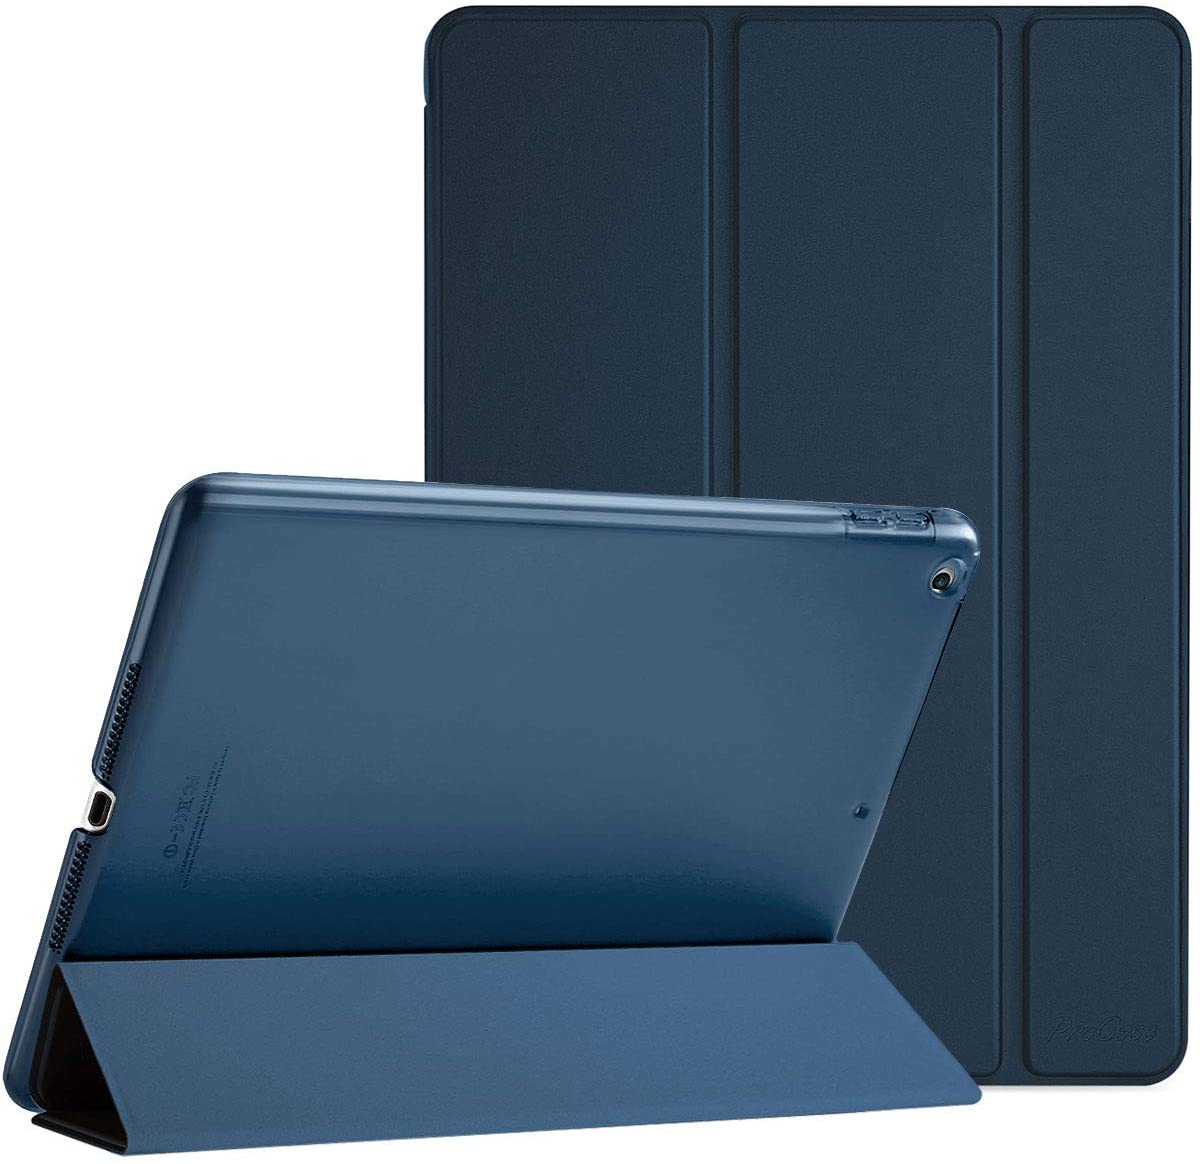 ProCase Smart Case for iPad 2 Edition -  Navy Blue & Gold. - e4cents